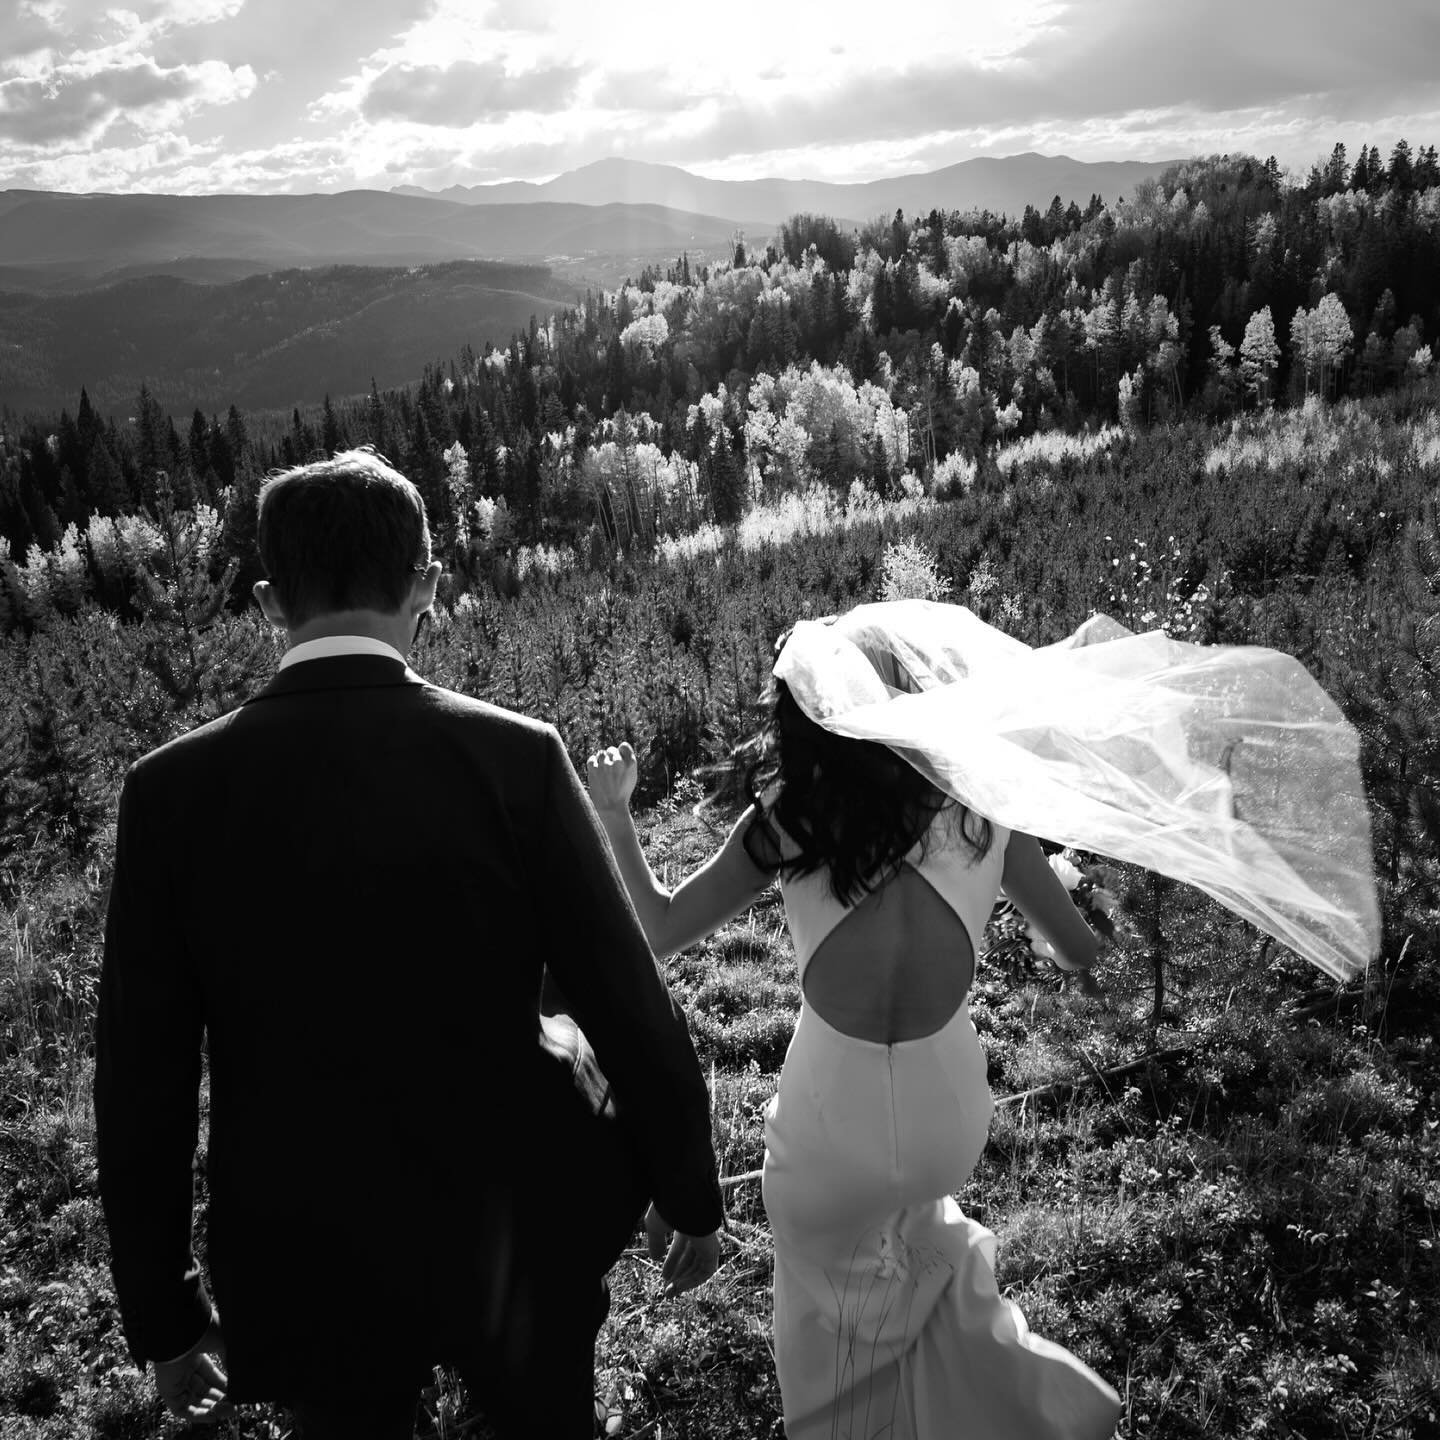 REASON #1 TO ELOPE IN CO: ADVENTURE 

Turning your wedding day into a new adventure that the two of you can explore together is my top reason to elope in Colorado (and in general). 

Marriage not only represents a lifelong commitment to each other, b